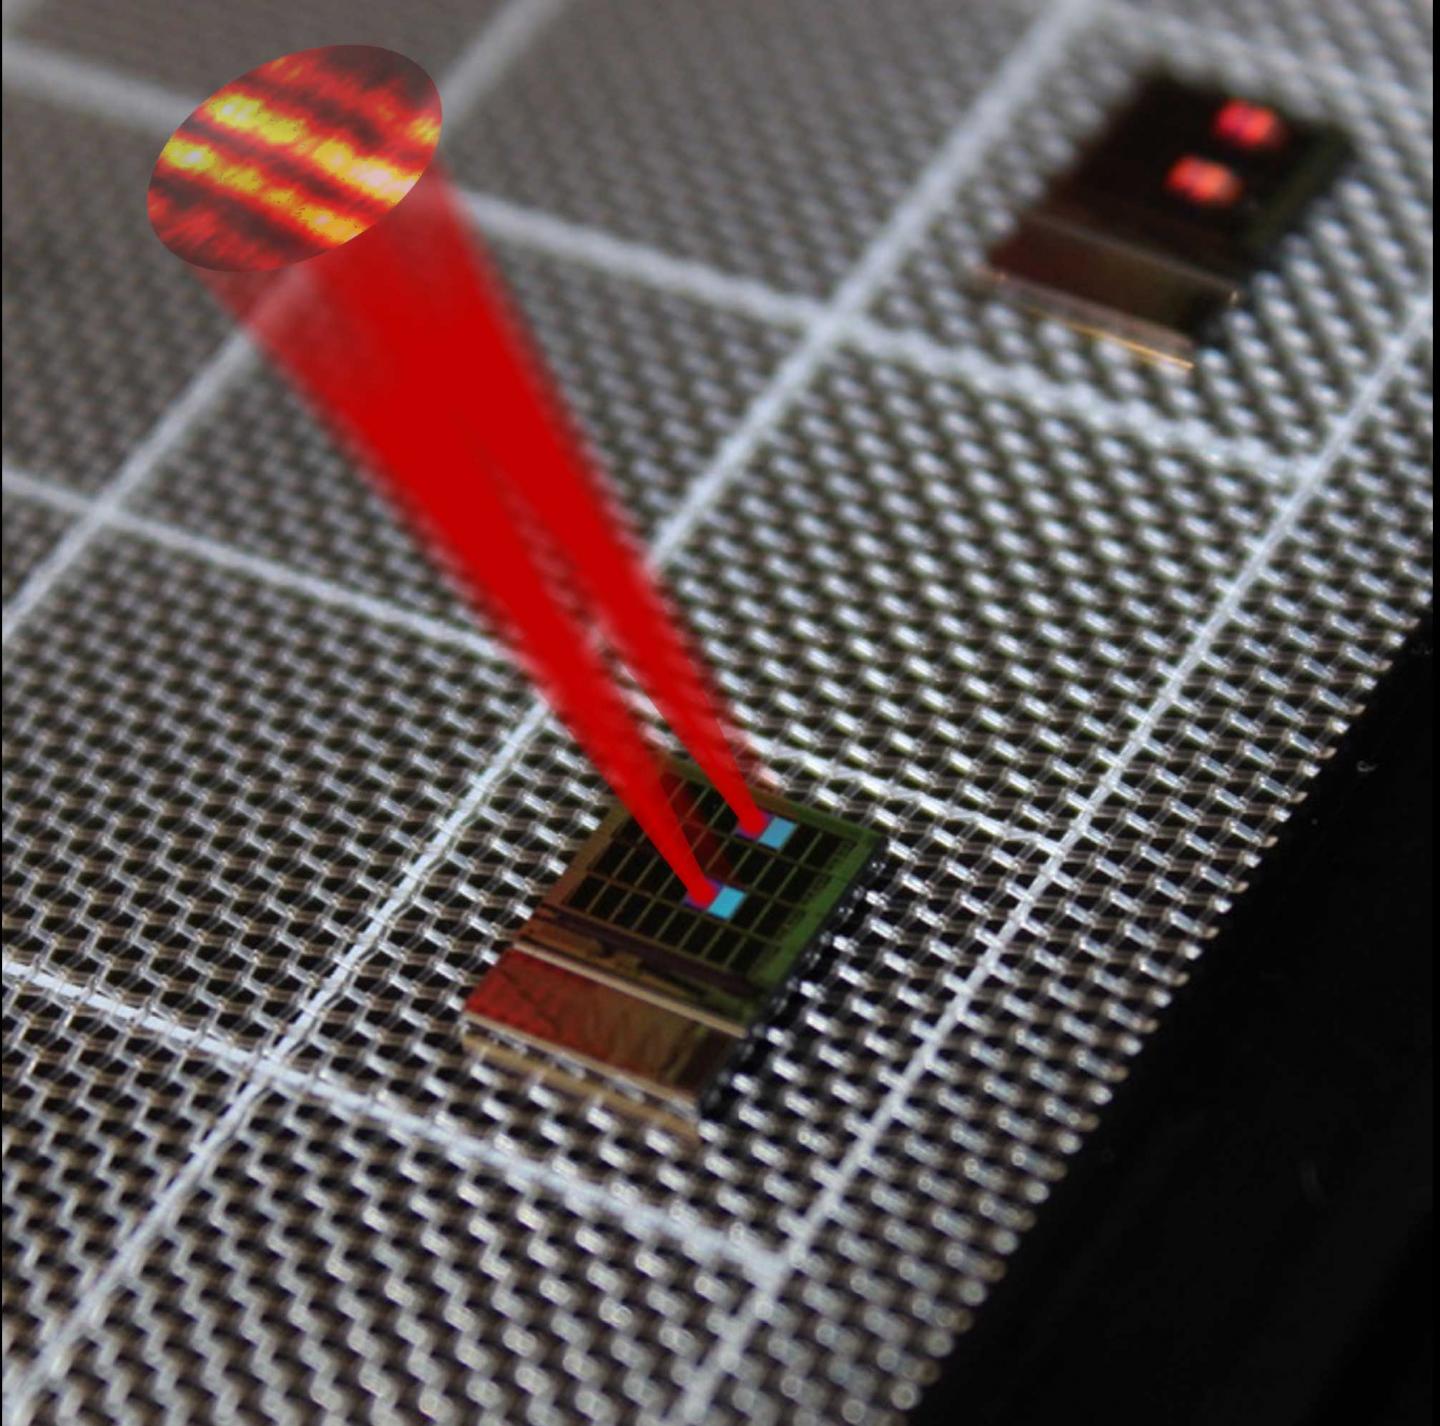 Silicon chip with a tiled array